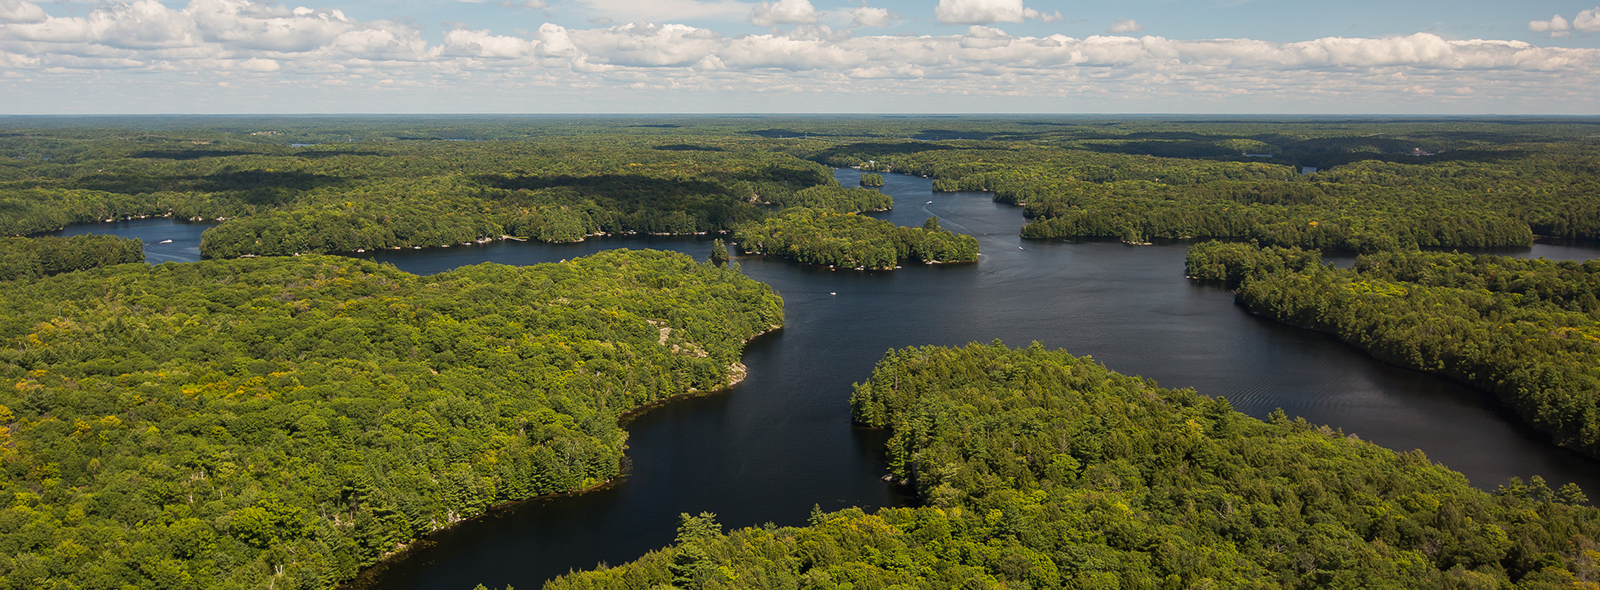 Northern Ontario scenery with lakes and forest